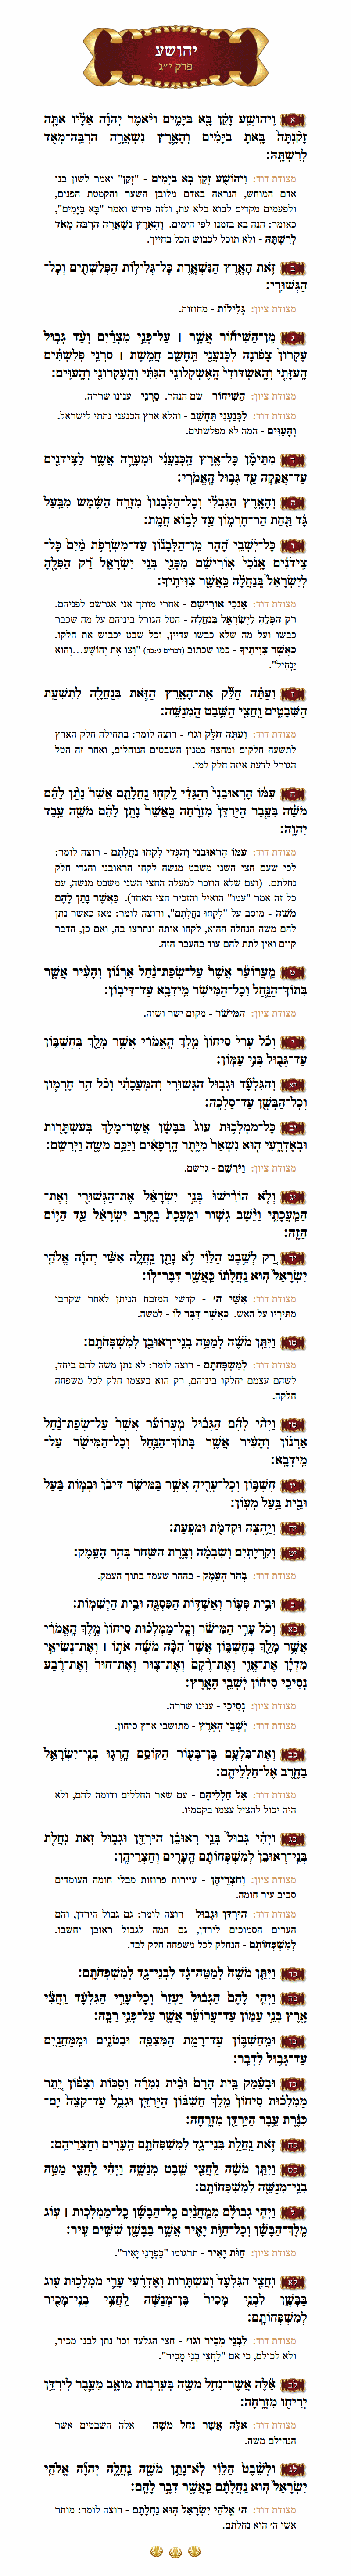 Sefer Yehoshua Chapter 13 with commentary